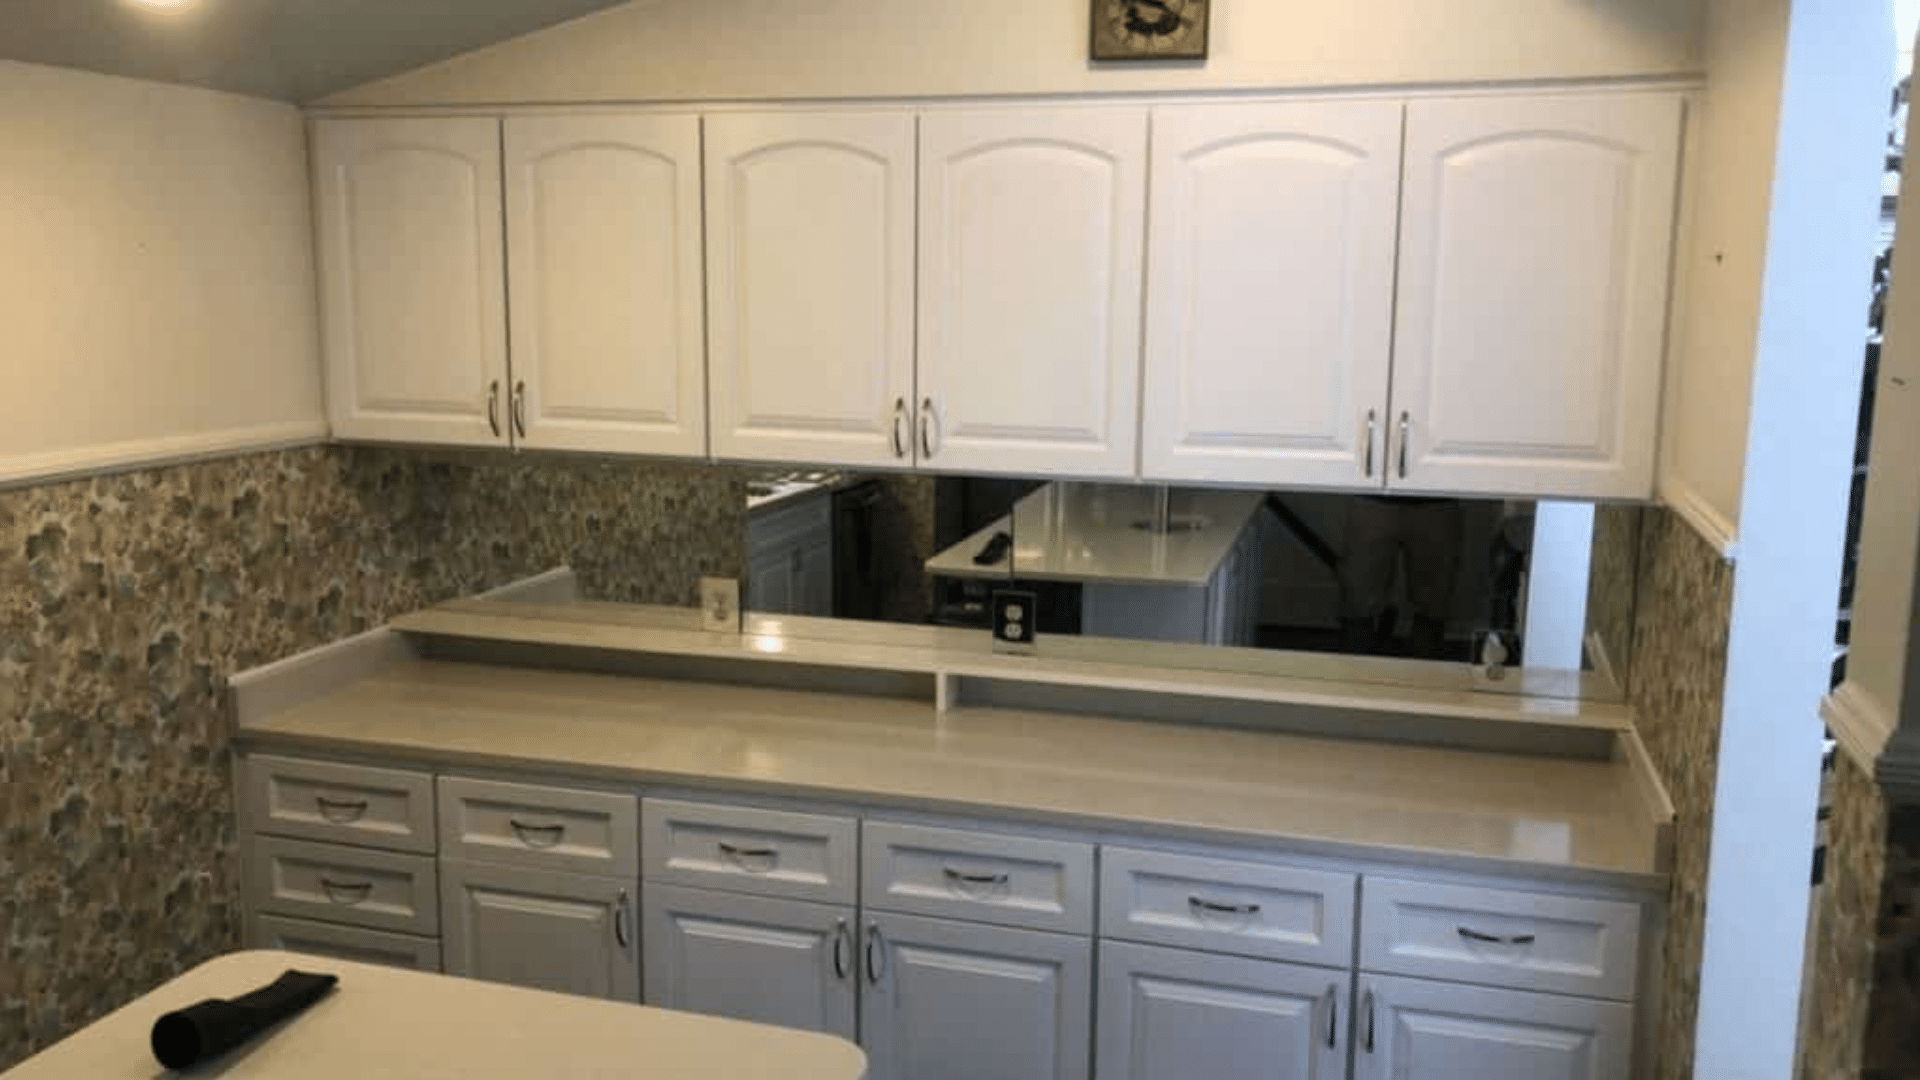 Mid Sized Kitchen Cabinet Reface In Betton Woods 15 400